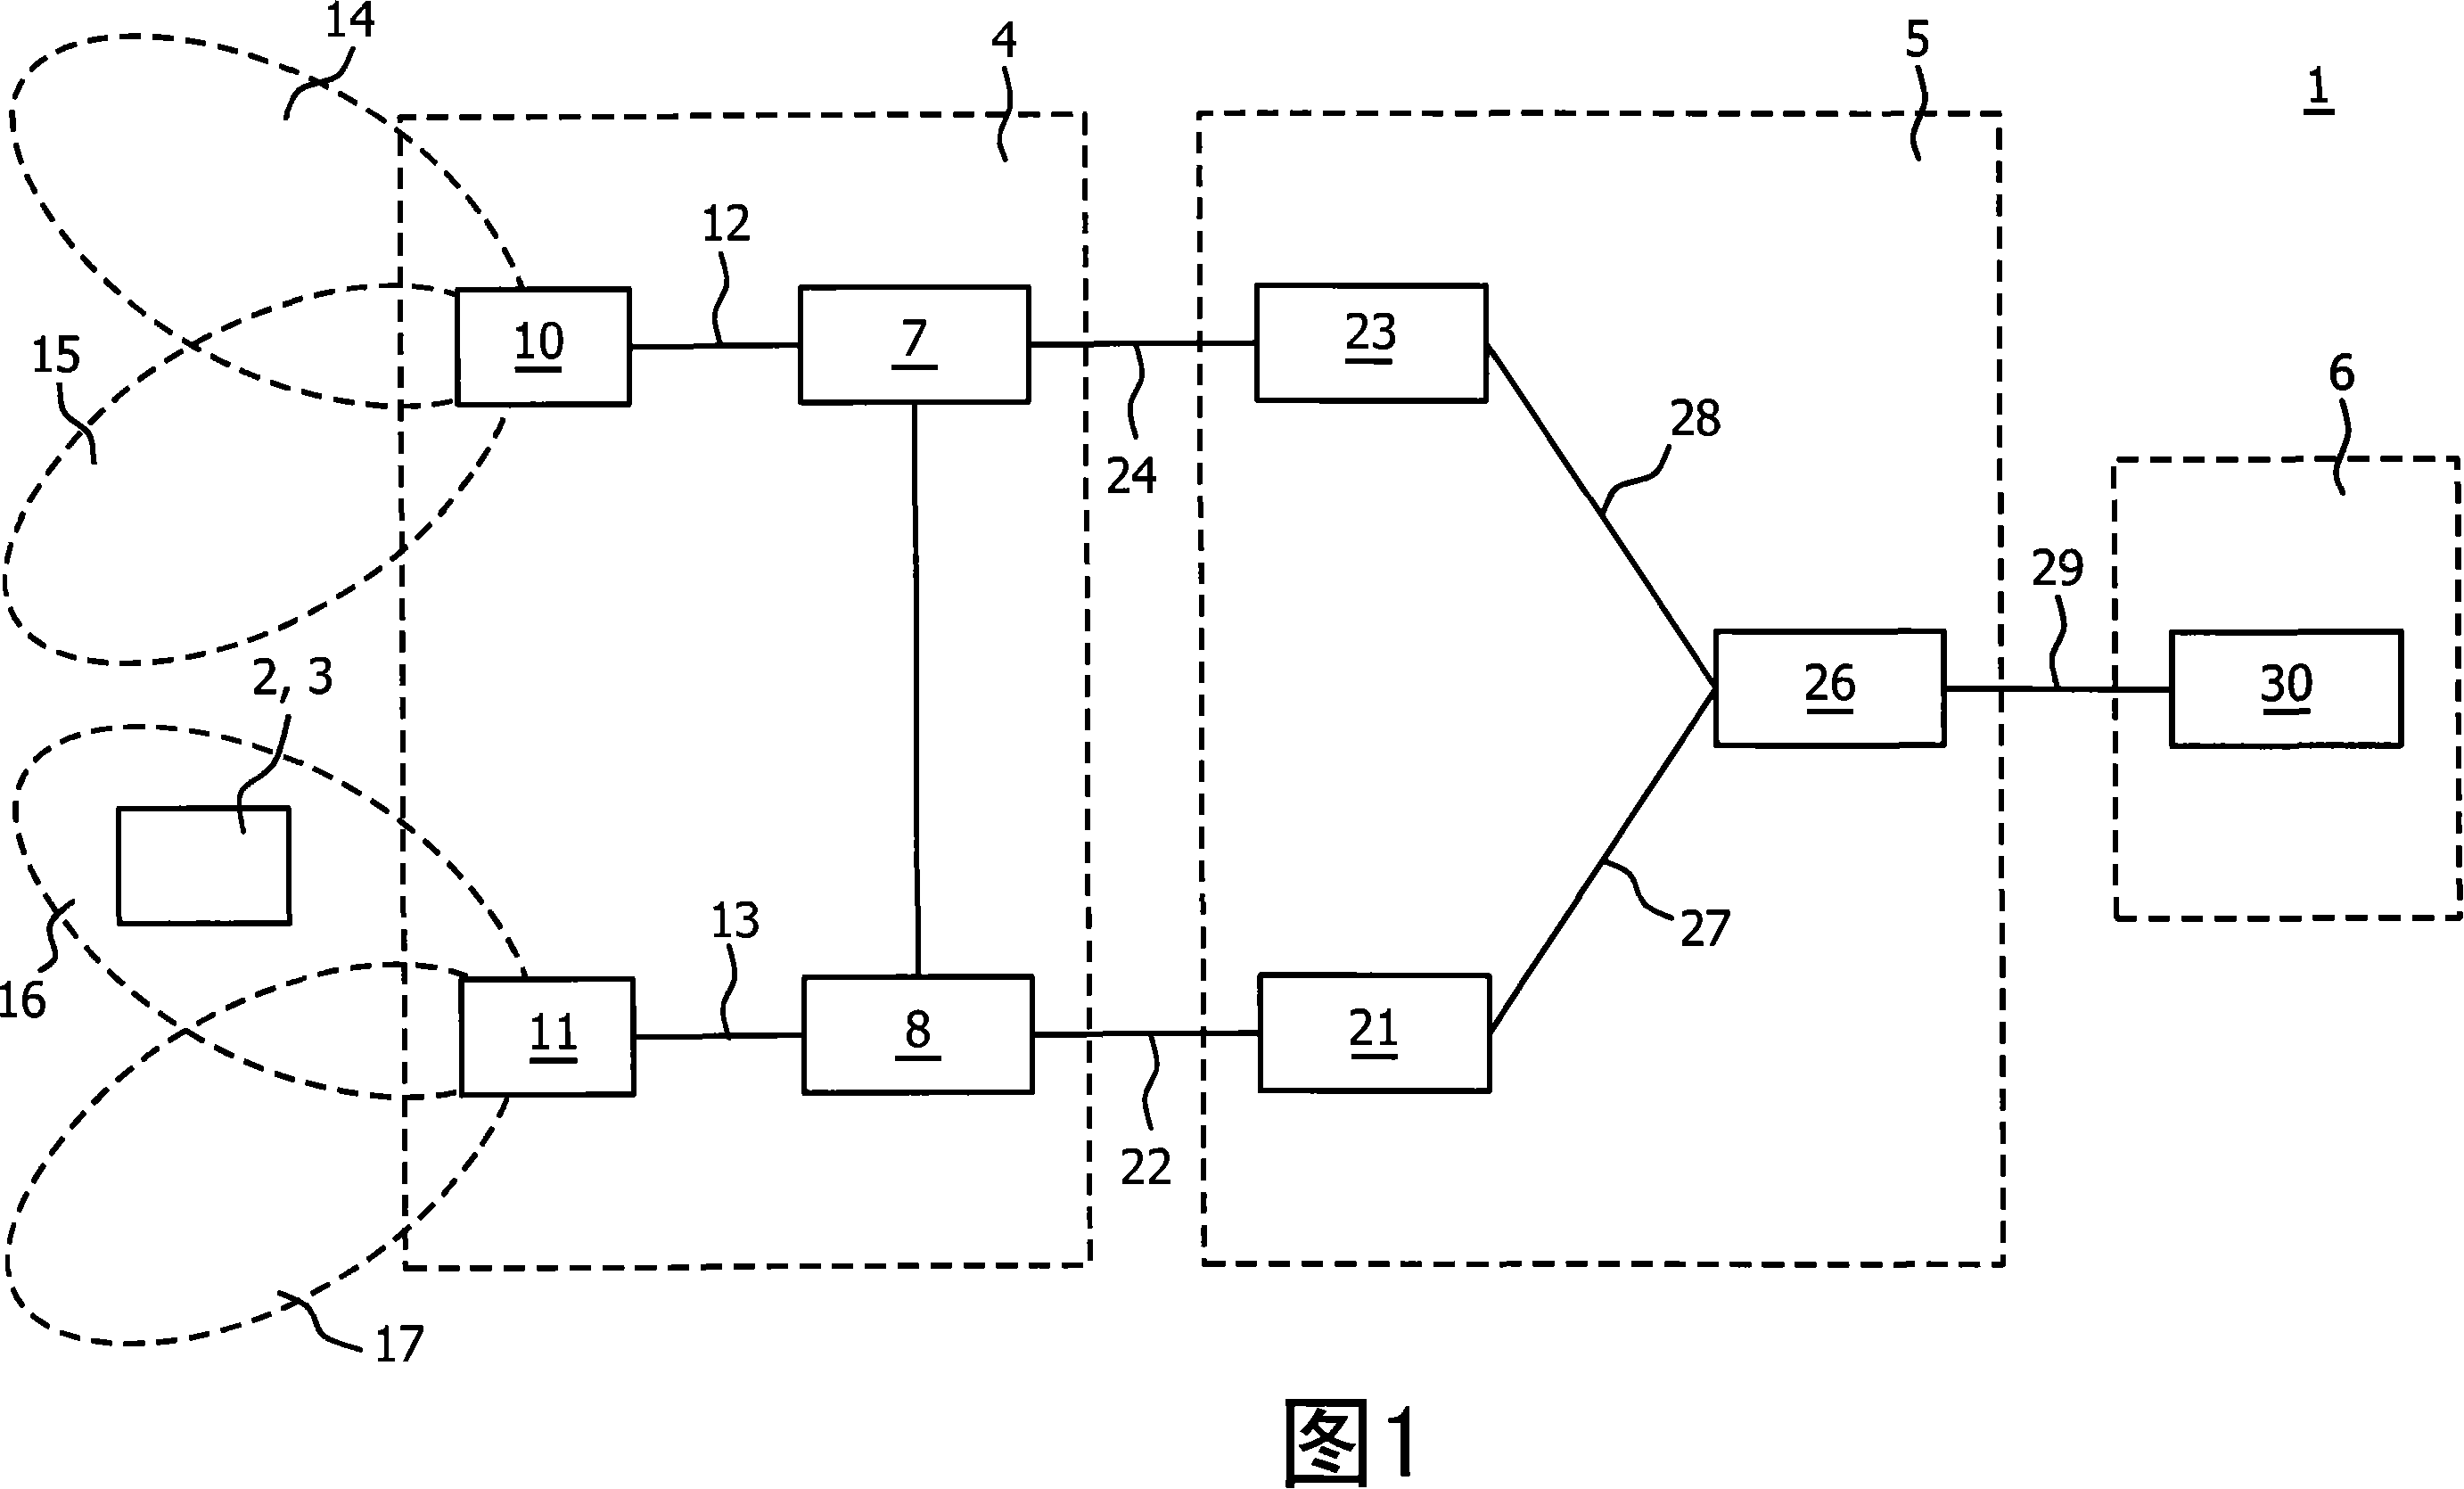 Receiver apparatus and method for receiving data units over a channel